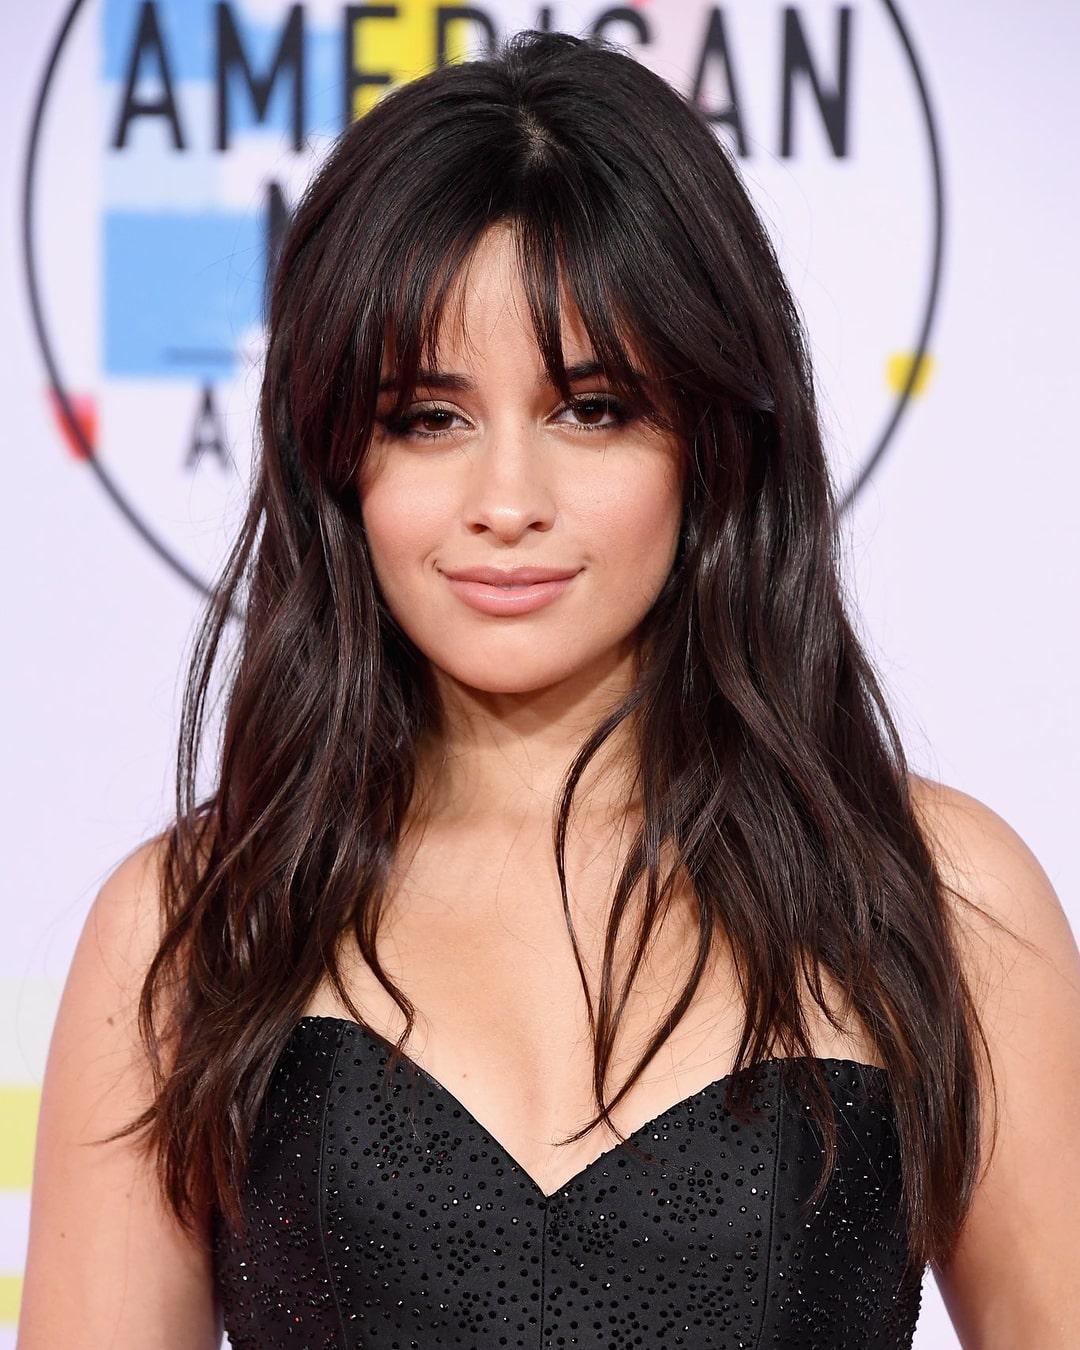 75+ Hot Pictures Of Camila Cabello Will Explore Her Sexy Body | Best Of Comic Books